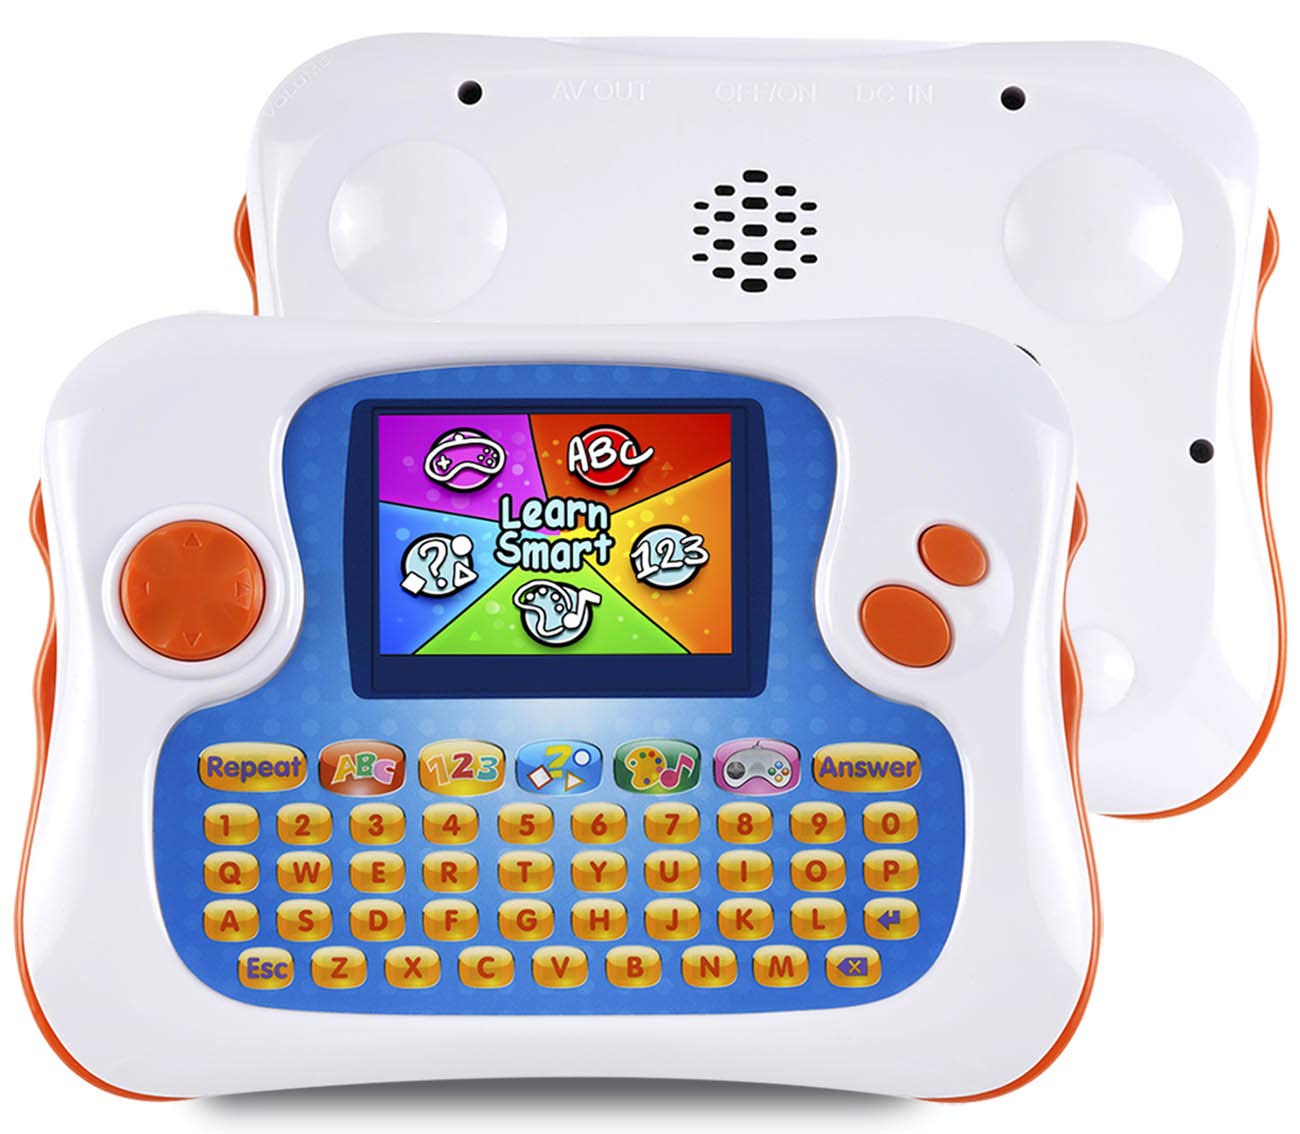 Kids Tablet,English-Spanish Bilingual Learning Tablet for Kids, Educational Toy with 104 Learning Apps/Games,Support TV Out Function,Great Choice for Preschool Toddlers Babies Early Education